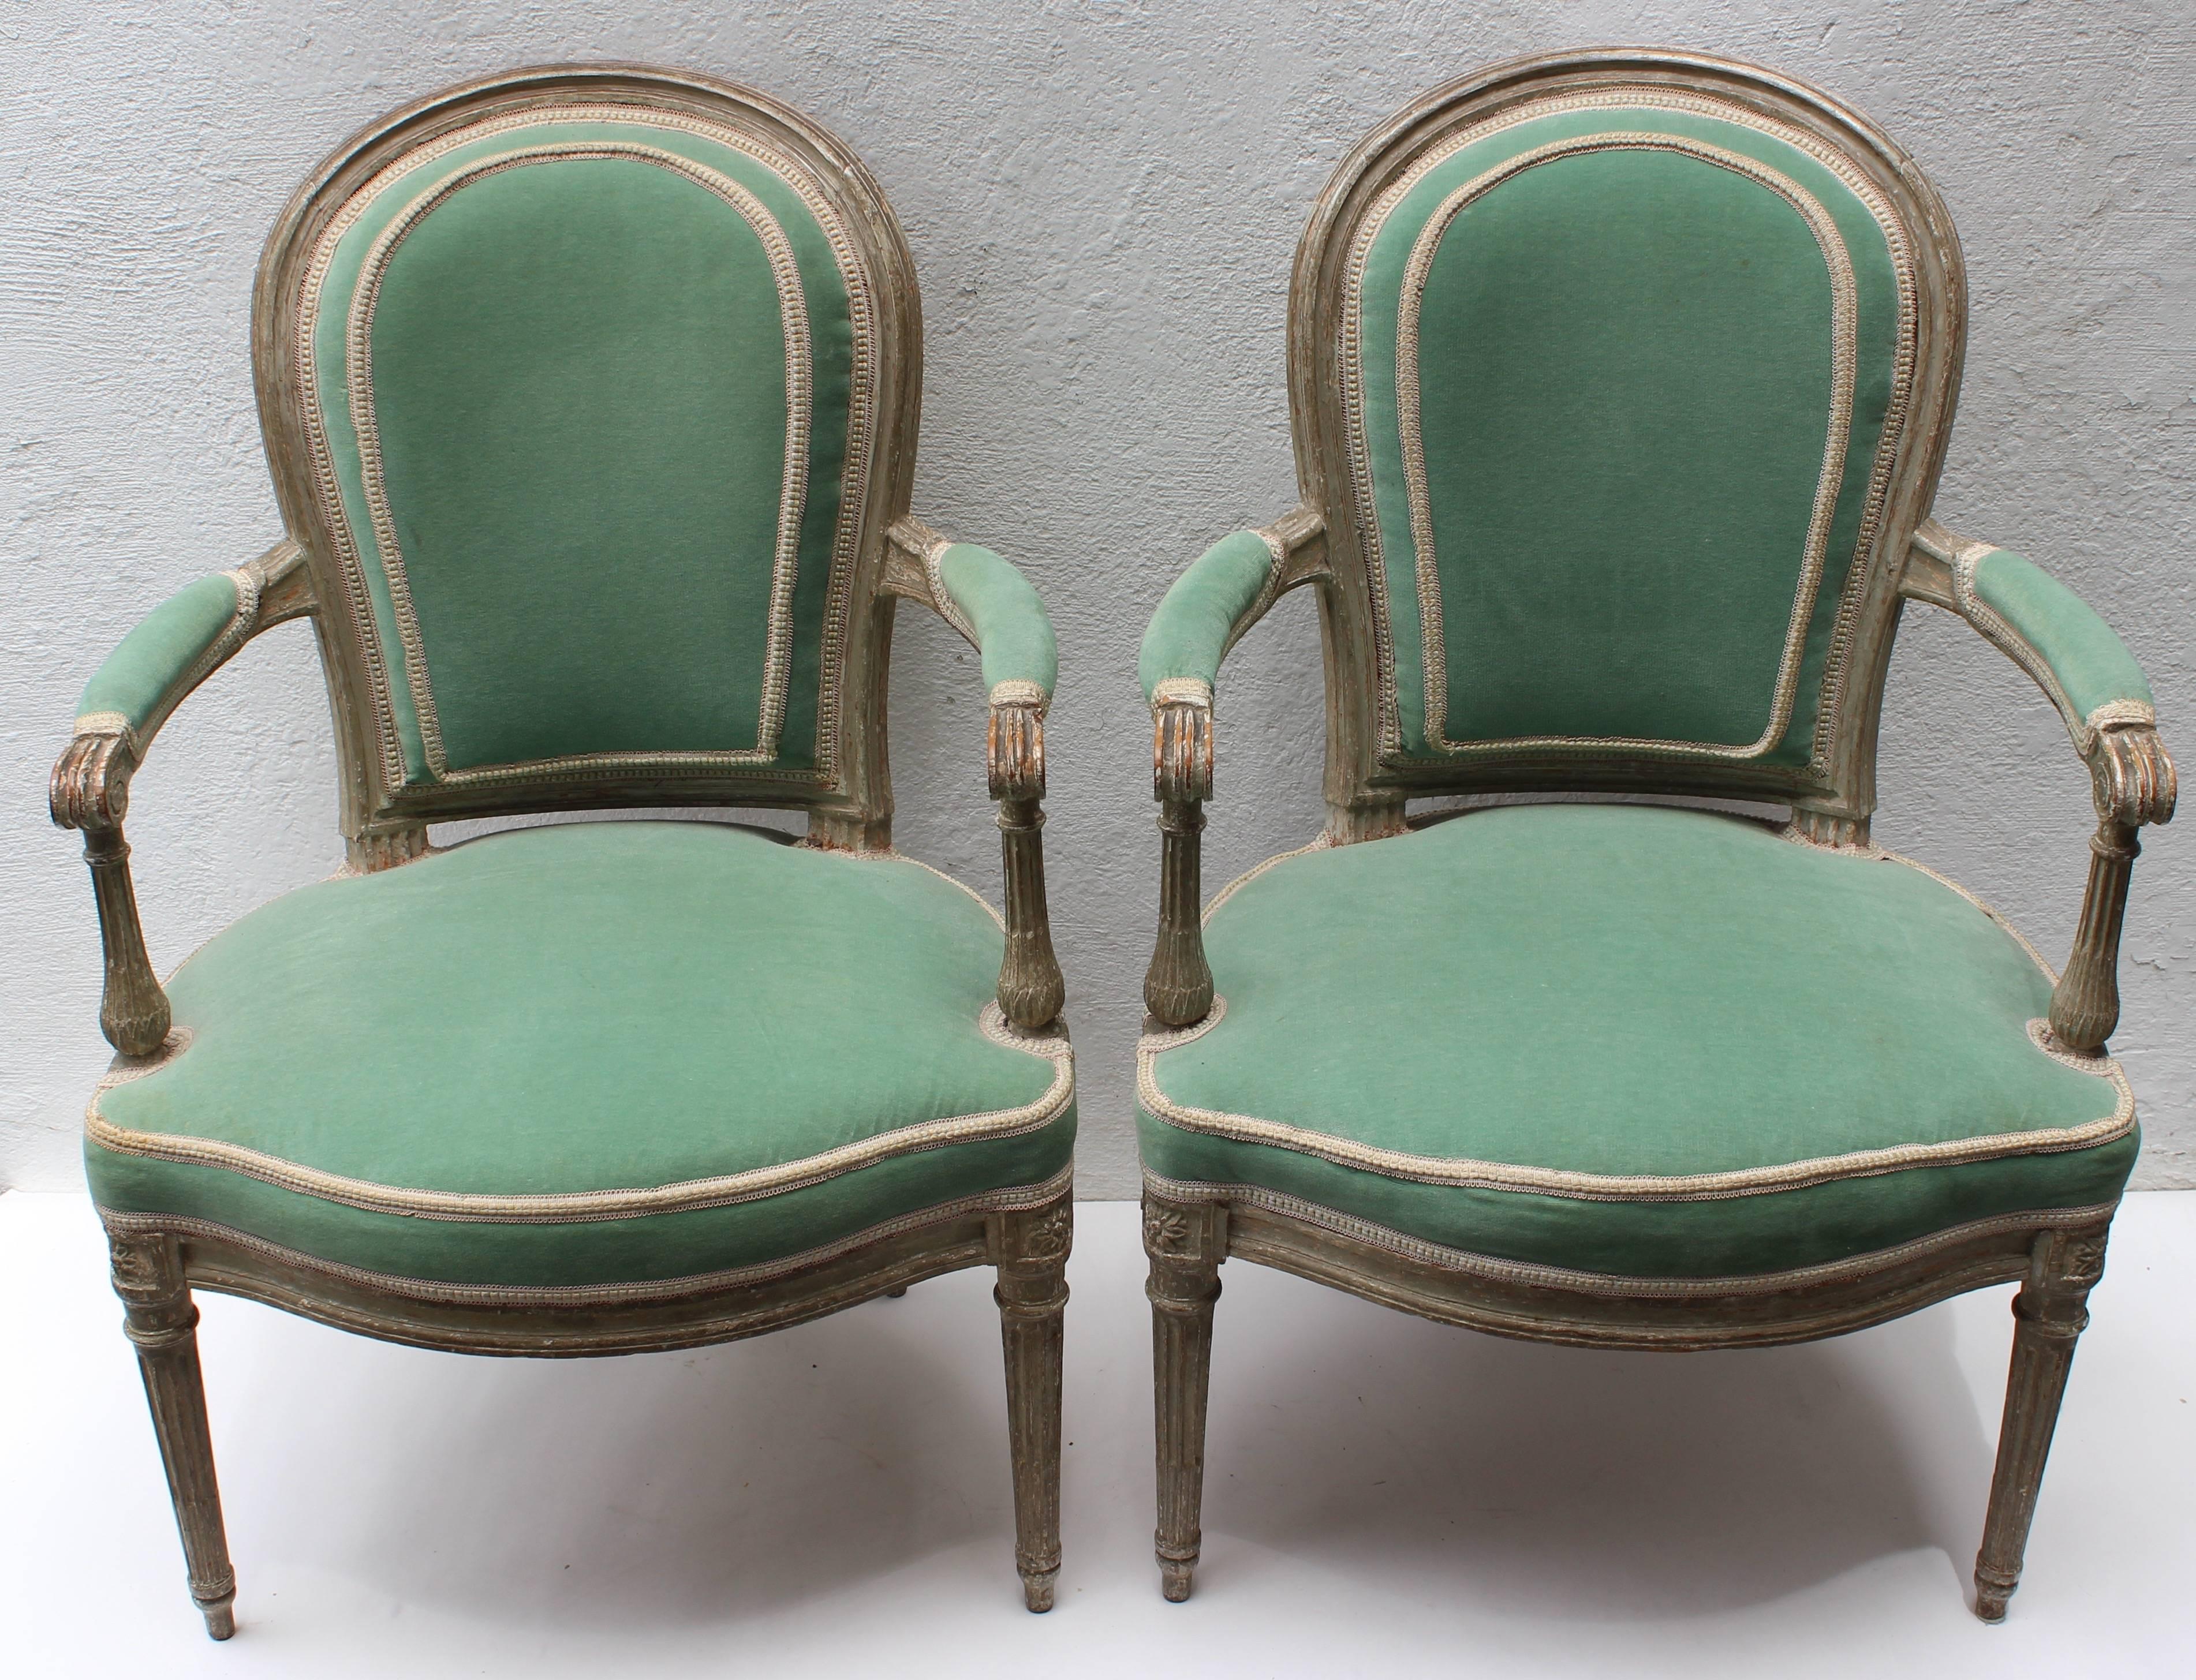 Pair of 18th Century Louis XVI Fauteuils Attributed to Georges Jacob In Excellent Condition For Sale In East Hampton, NY